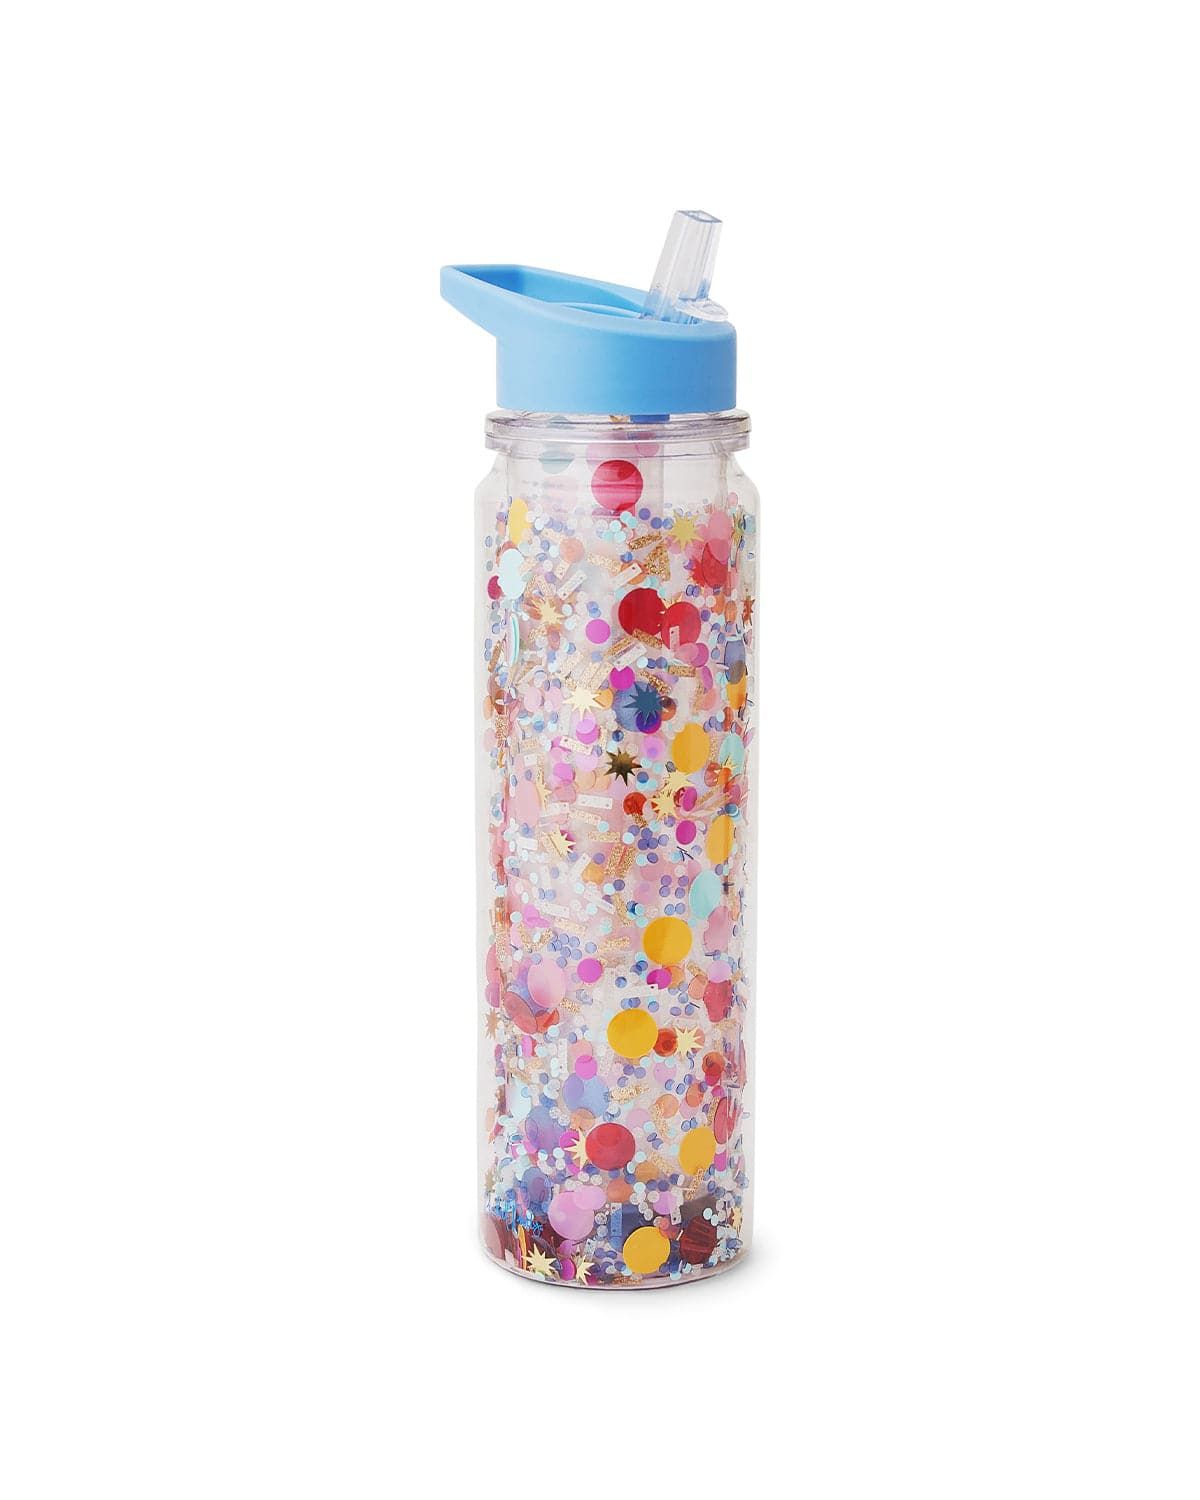 Celebrate Every Day Confetti Water Bottle with Straw | Packed Party